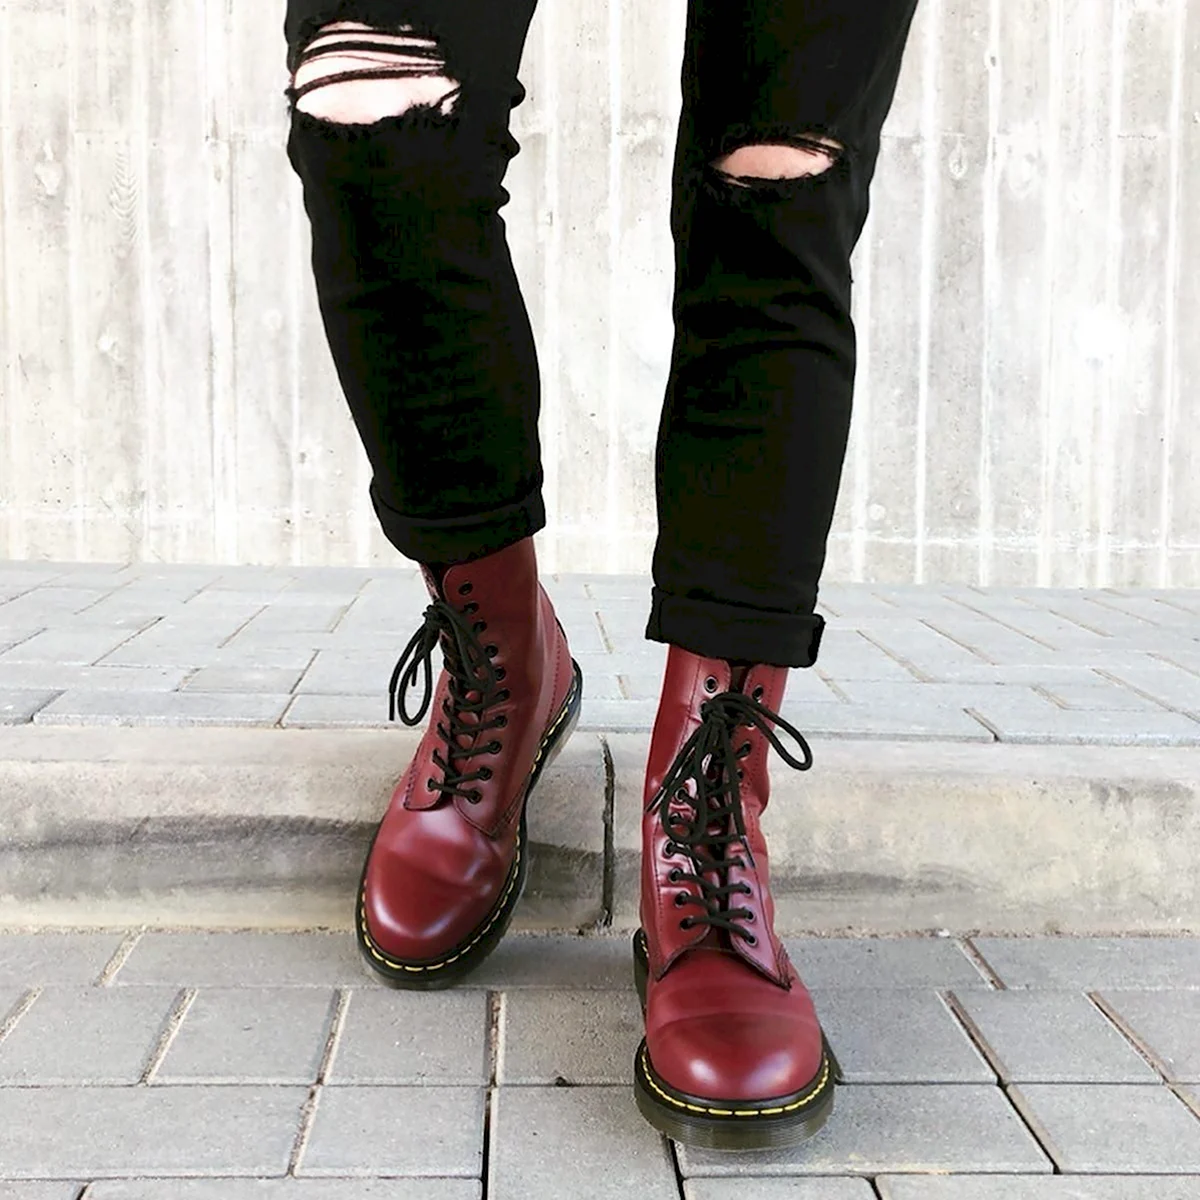 Dr Martens 1490 Cherry Red